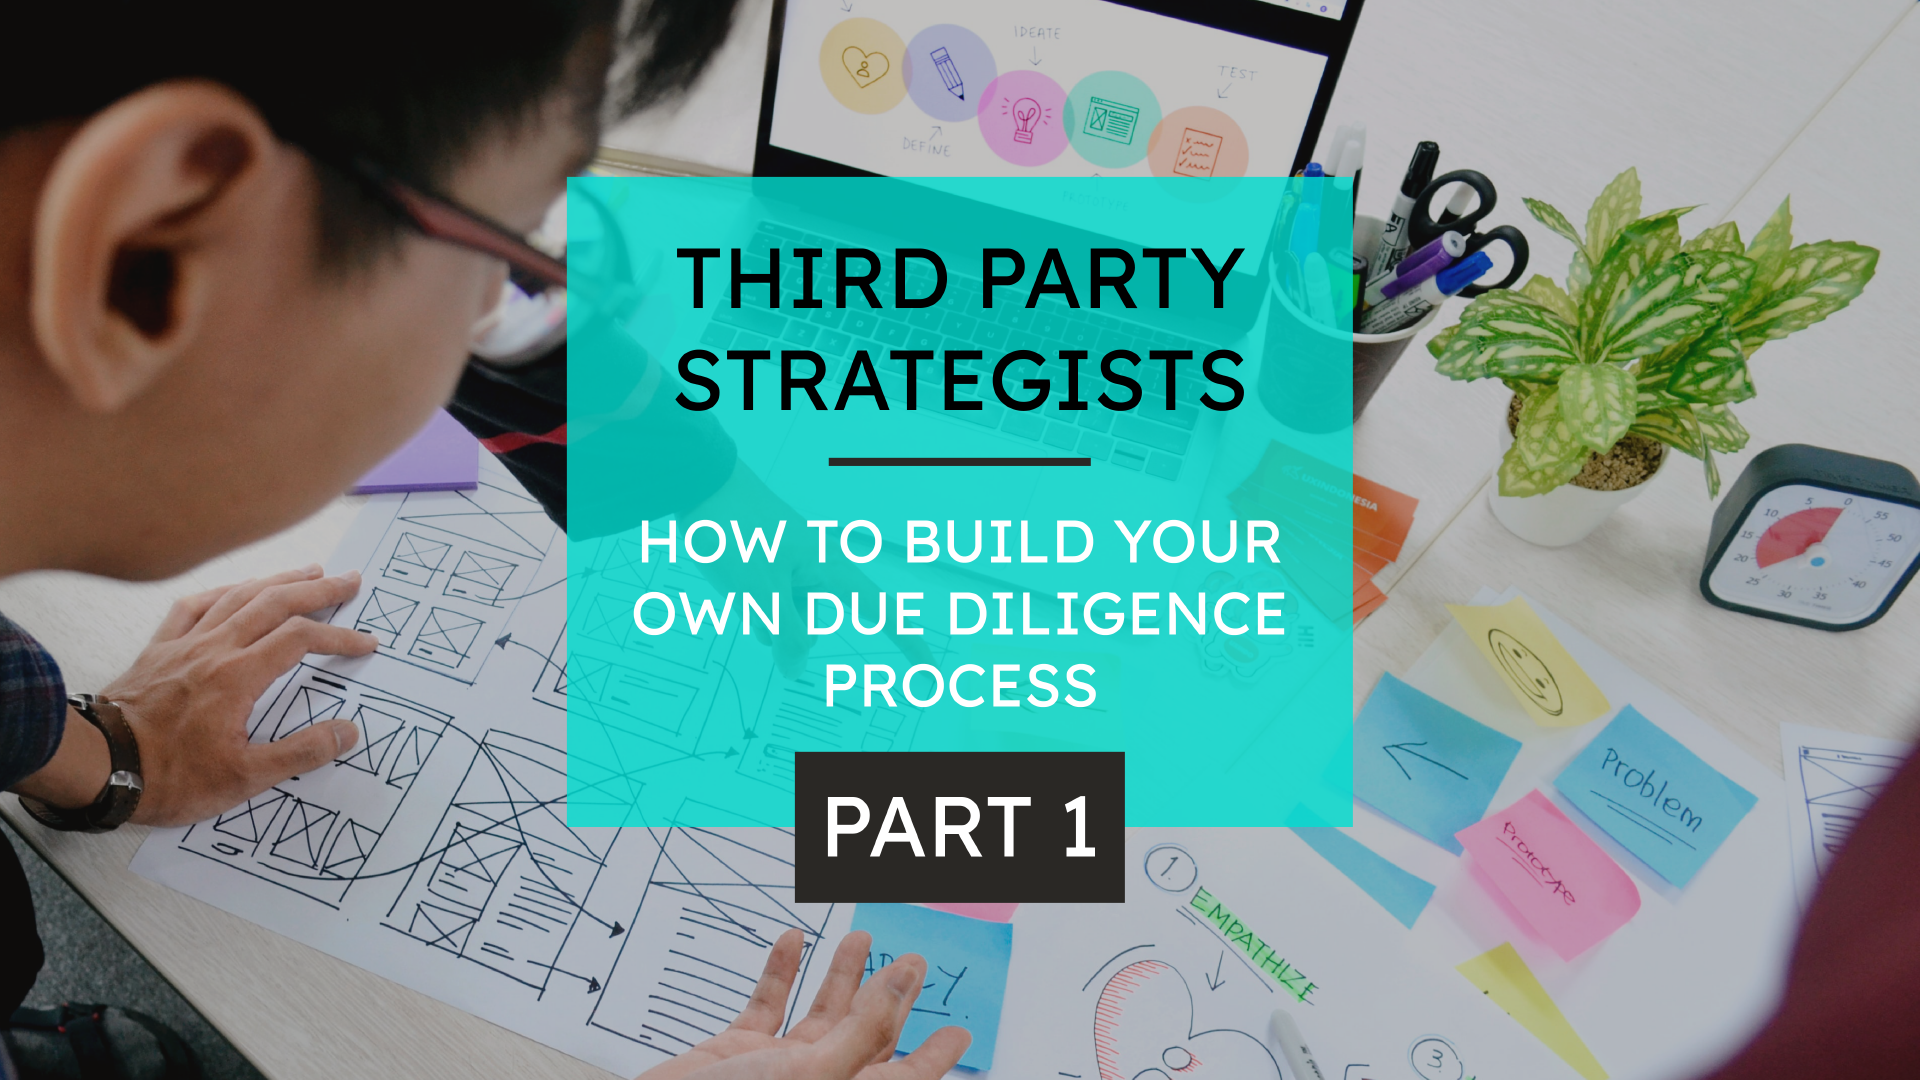 Third Party Strategists (Part-One) How to Build Your Own Due Diligence Process